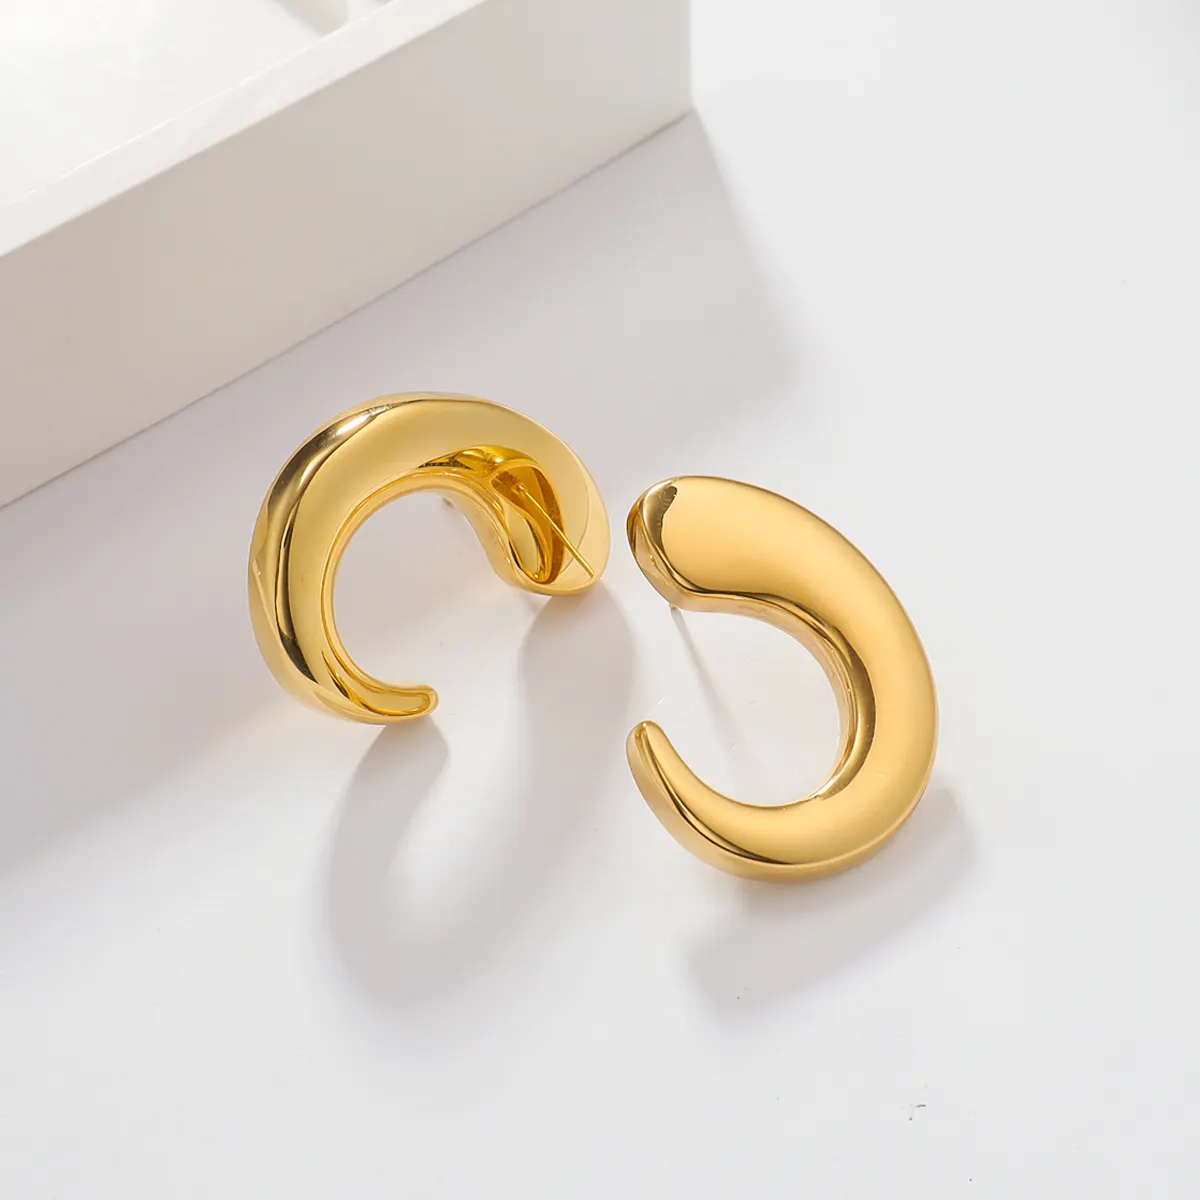 Fashion 18K Gold Plated C Stud Earrings Women Designer Tarnish Free Chunky Stainless Steel Thick CC Hoop Earring Jewelry